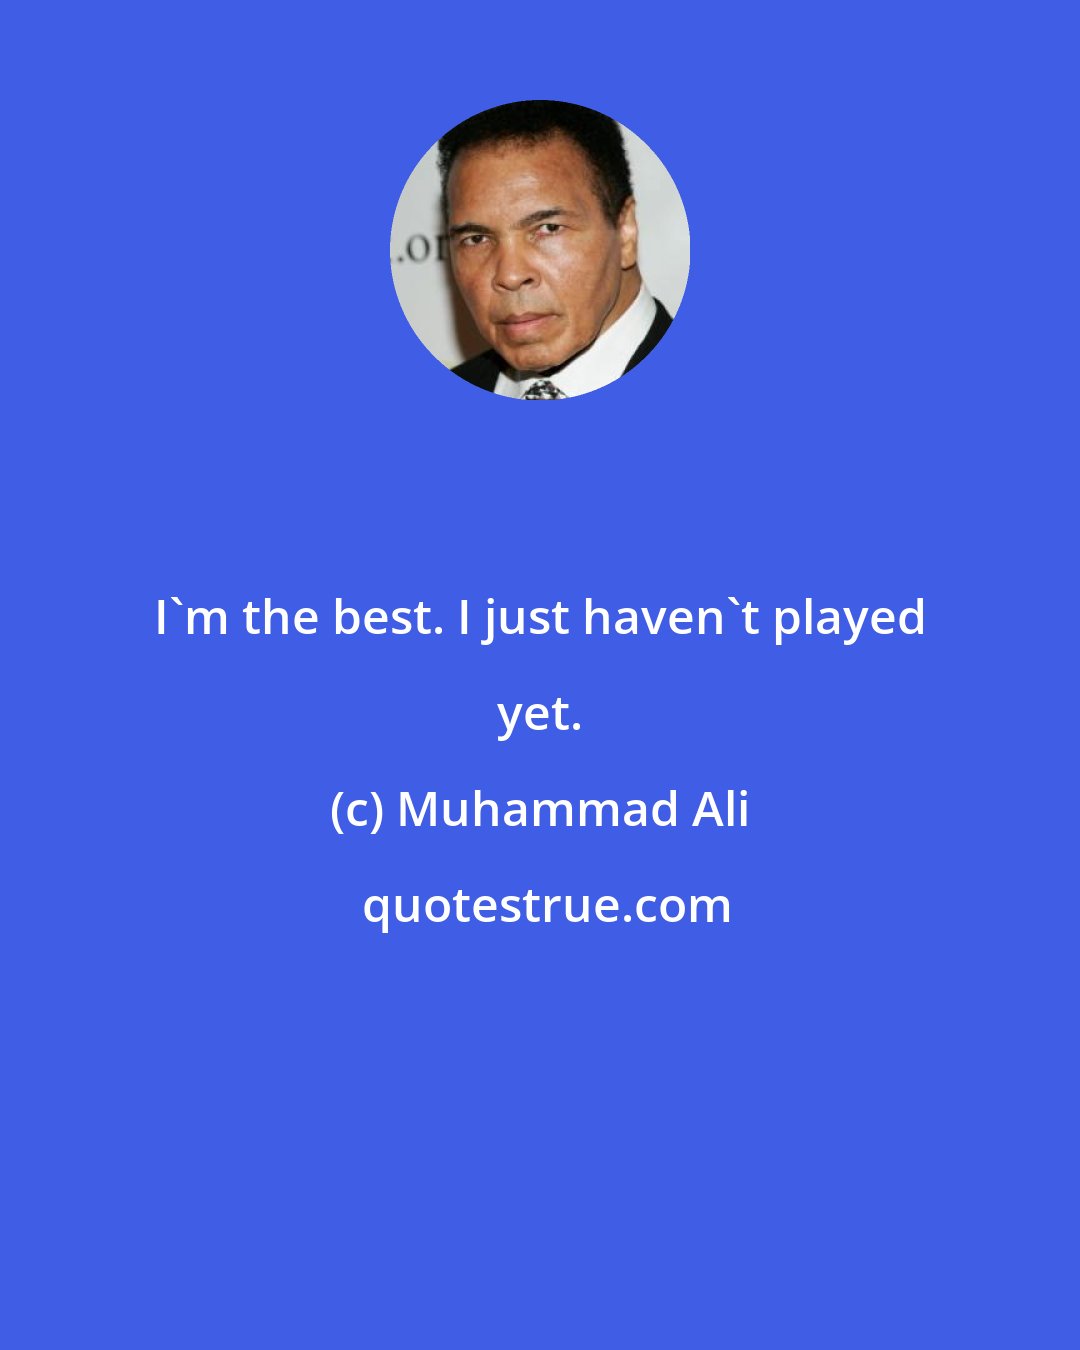 Muhammad Ali: I'm the best. I just haven't played yet.